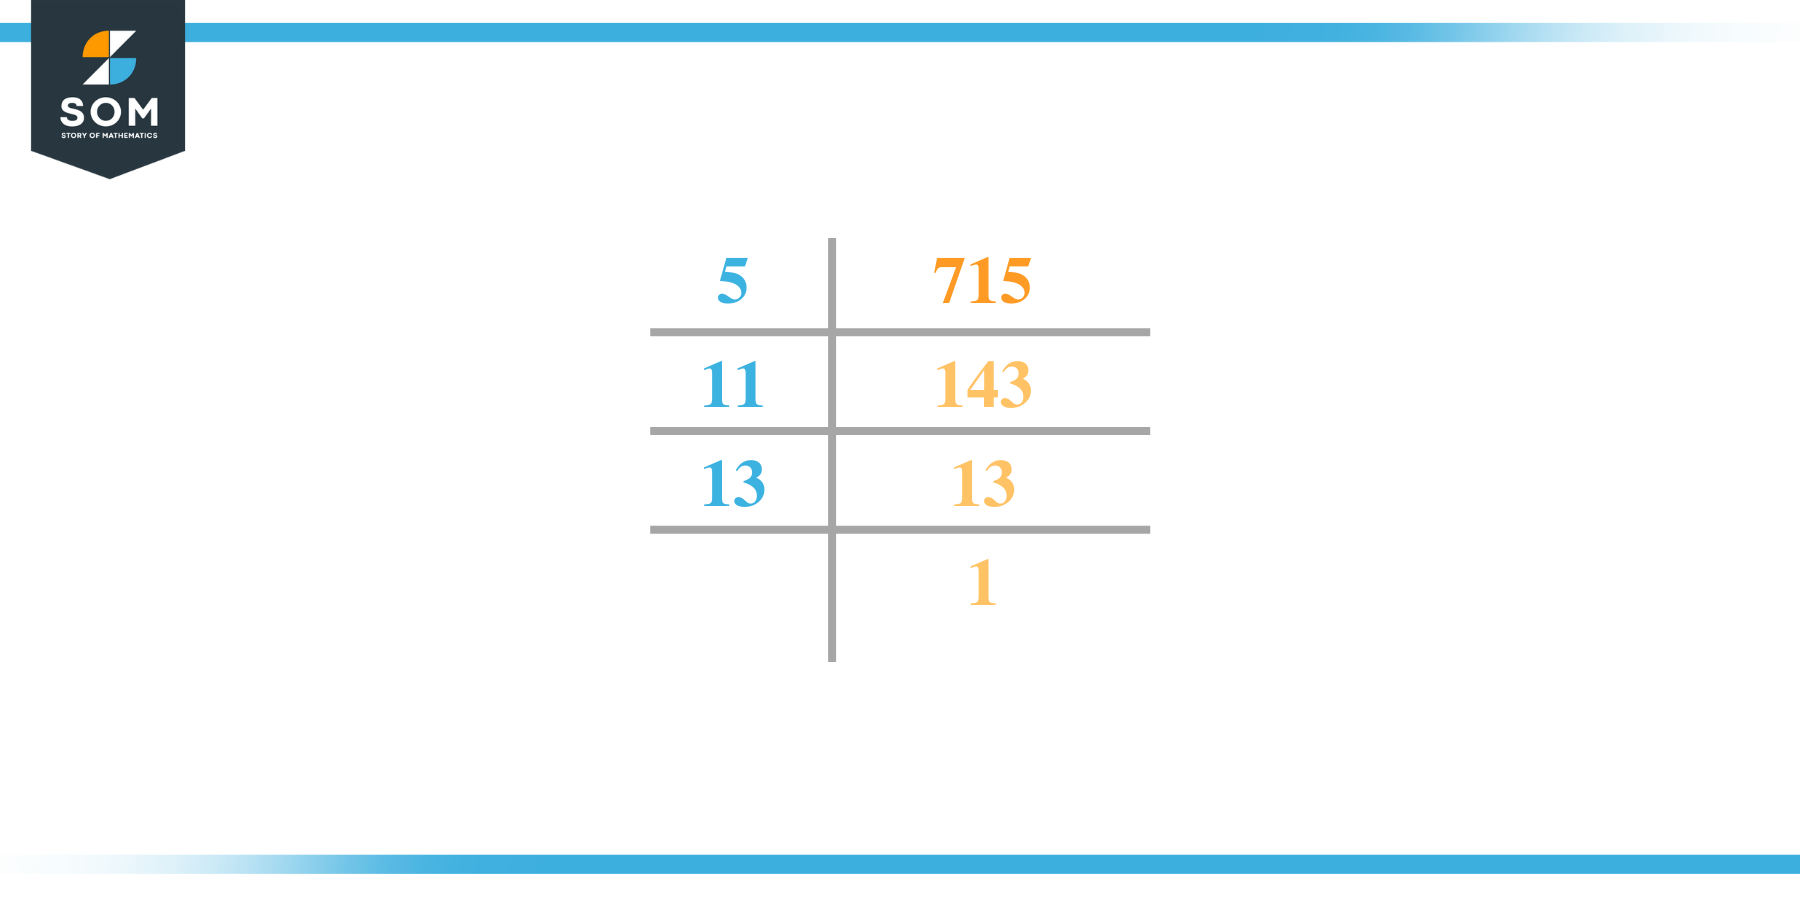 Prime factorization of seven hundred and fifteen